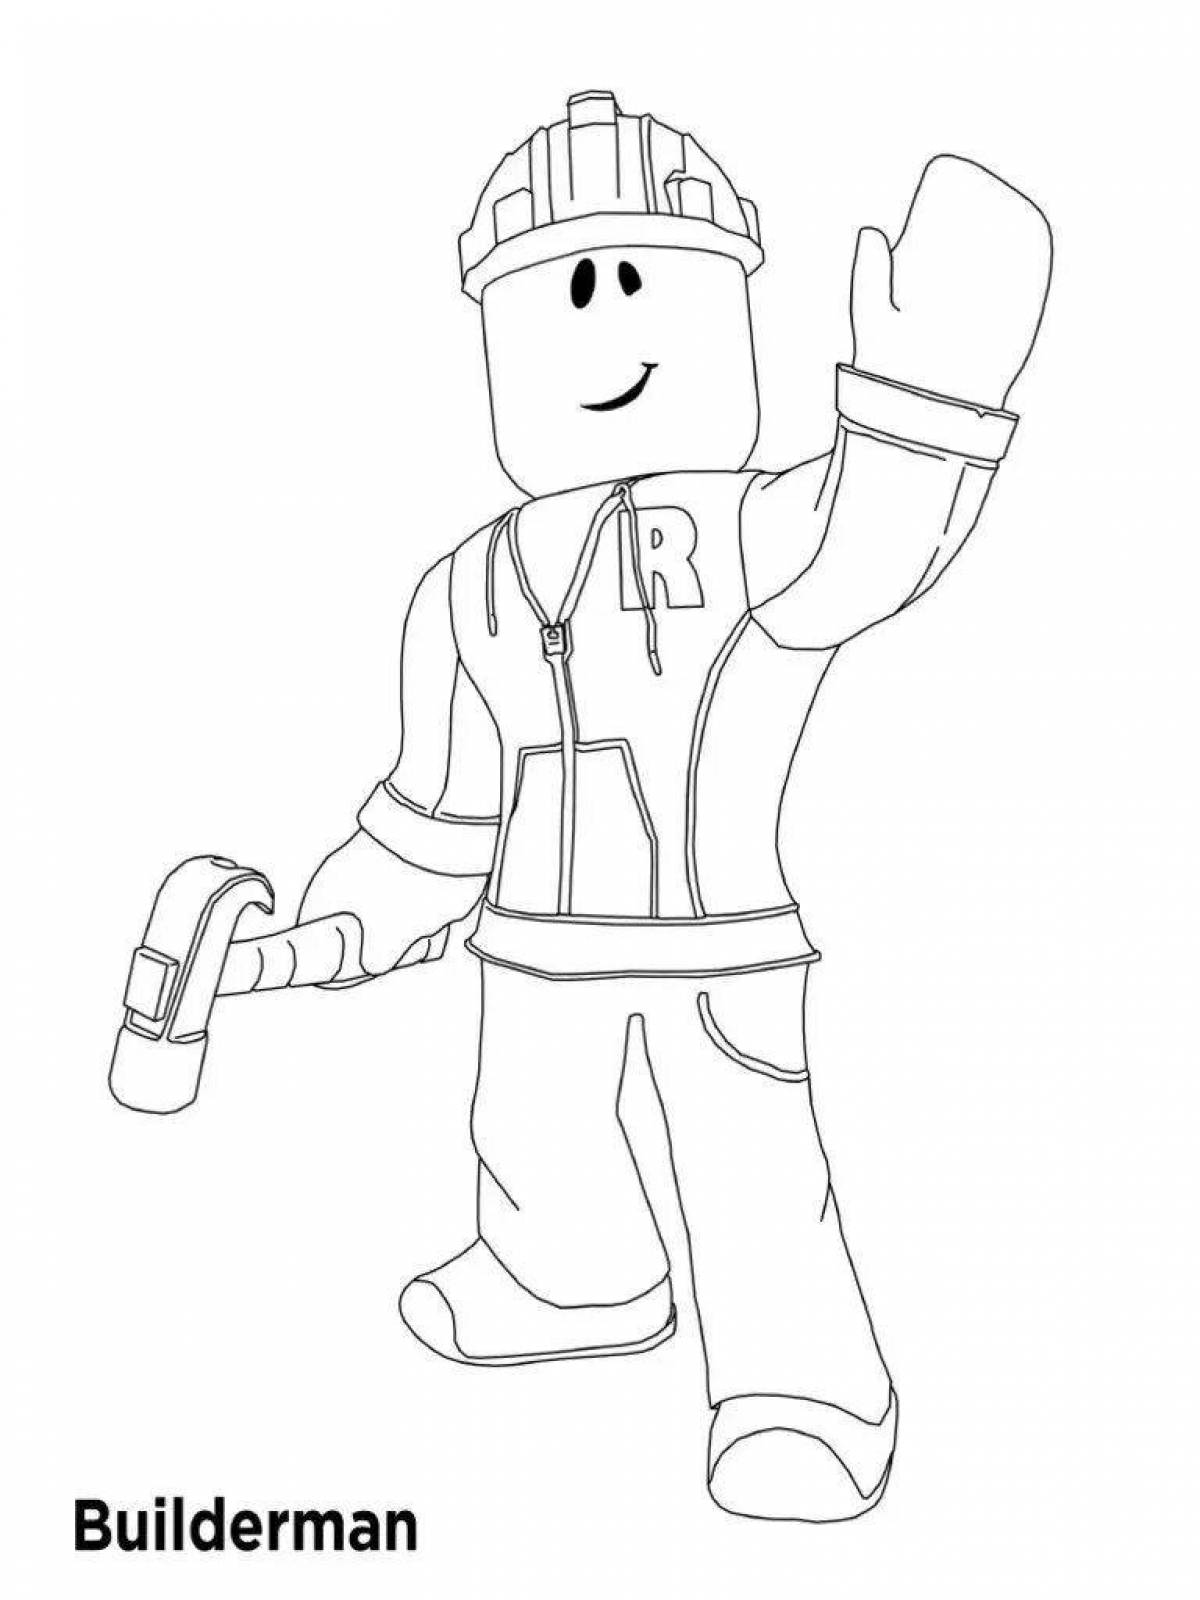 Colorful shiny roblox skin coloring page